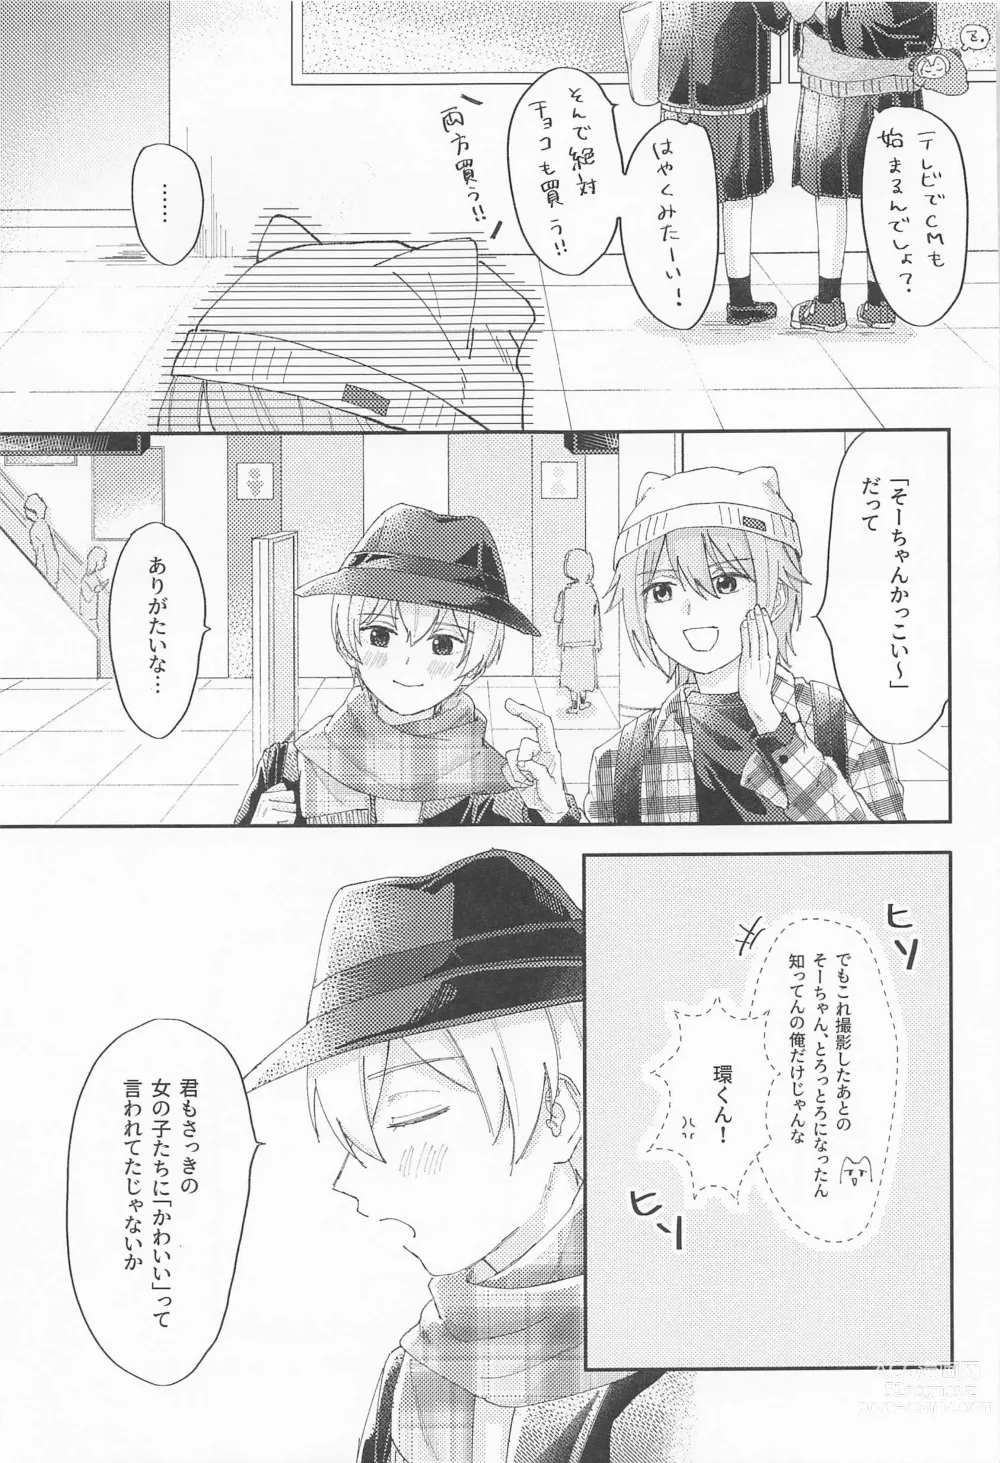 Page 22 of doujinshi VERY MERRY BERRY